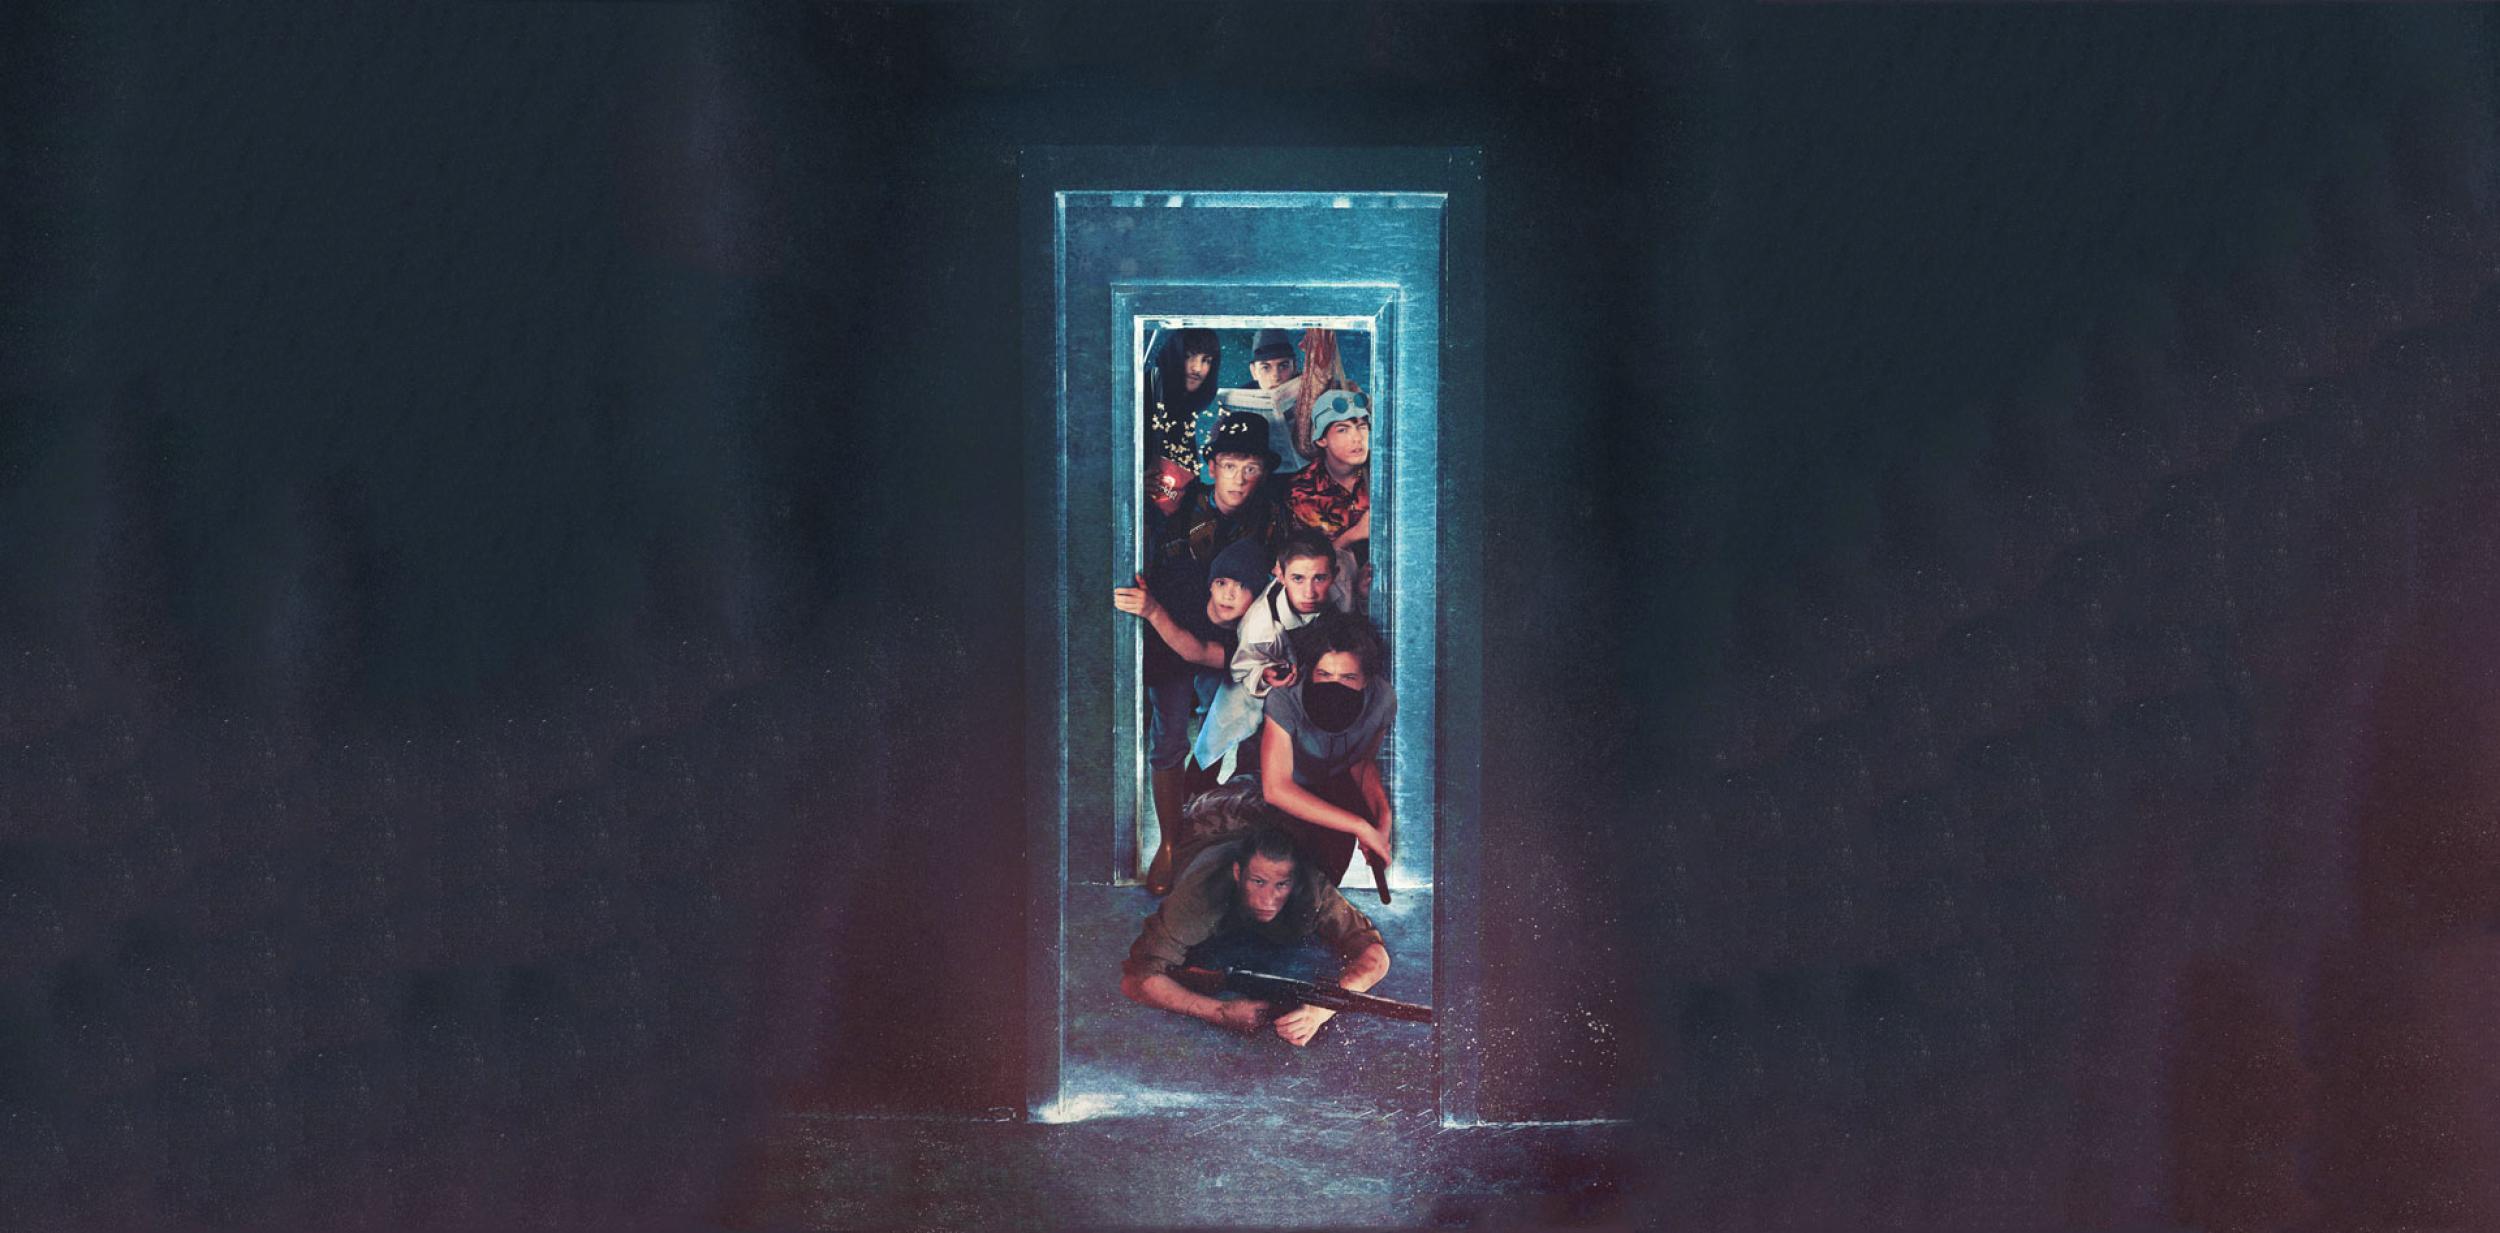 A number of people squeezing through a doorway